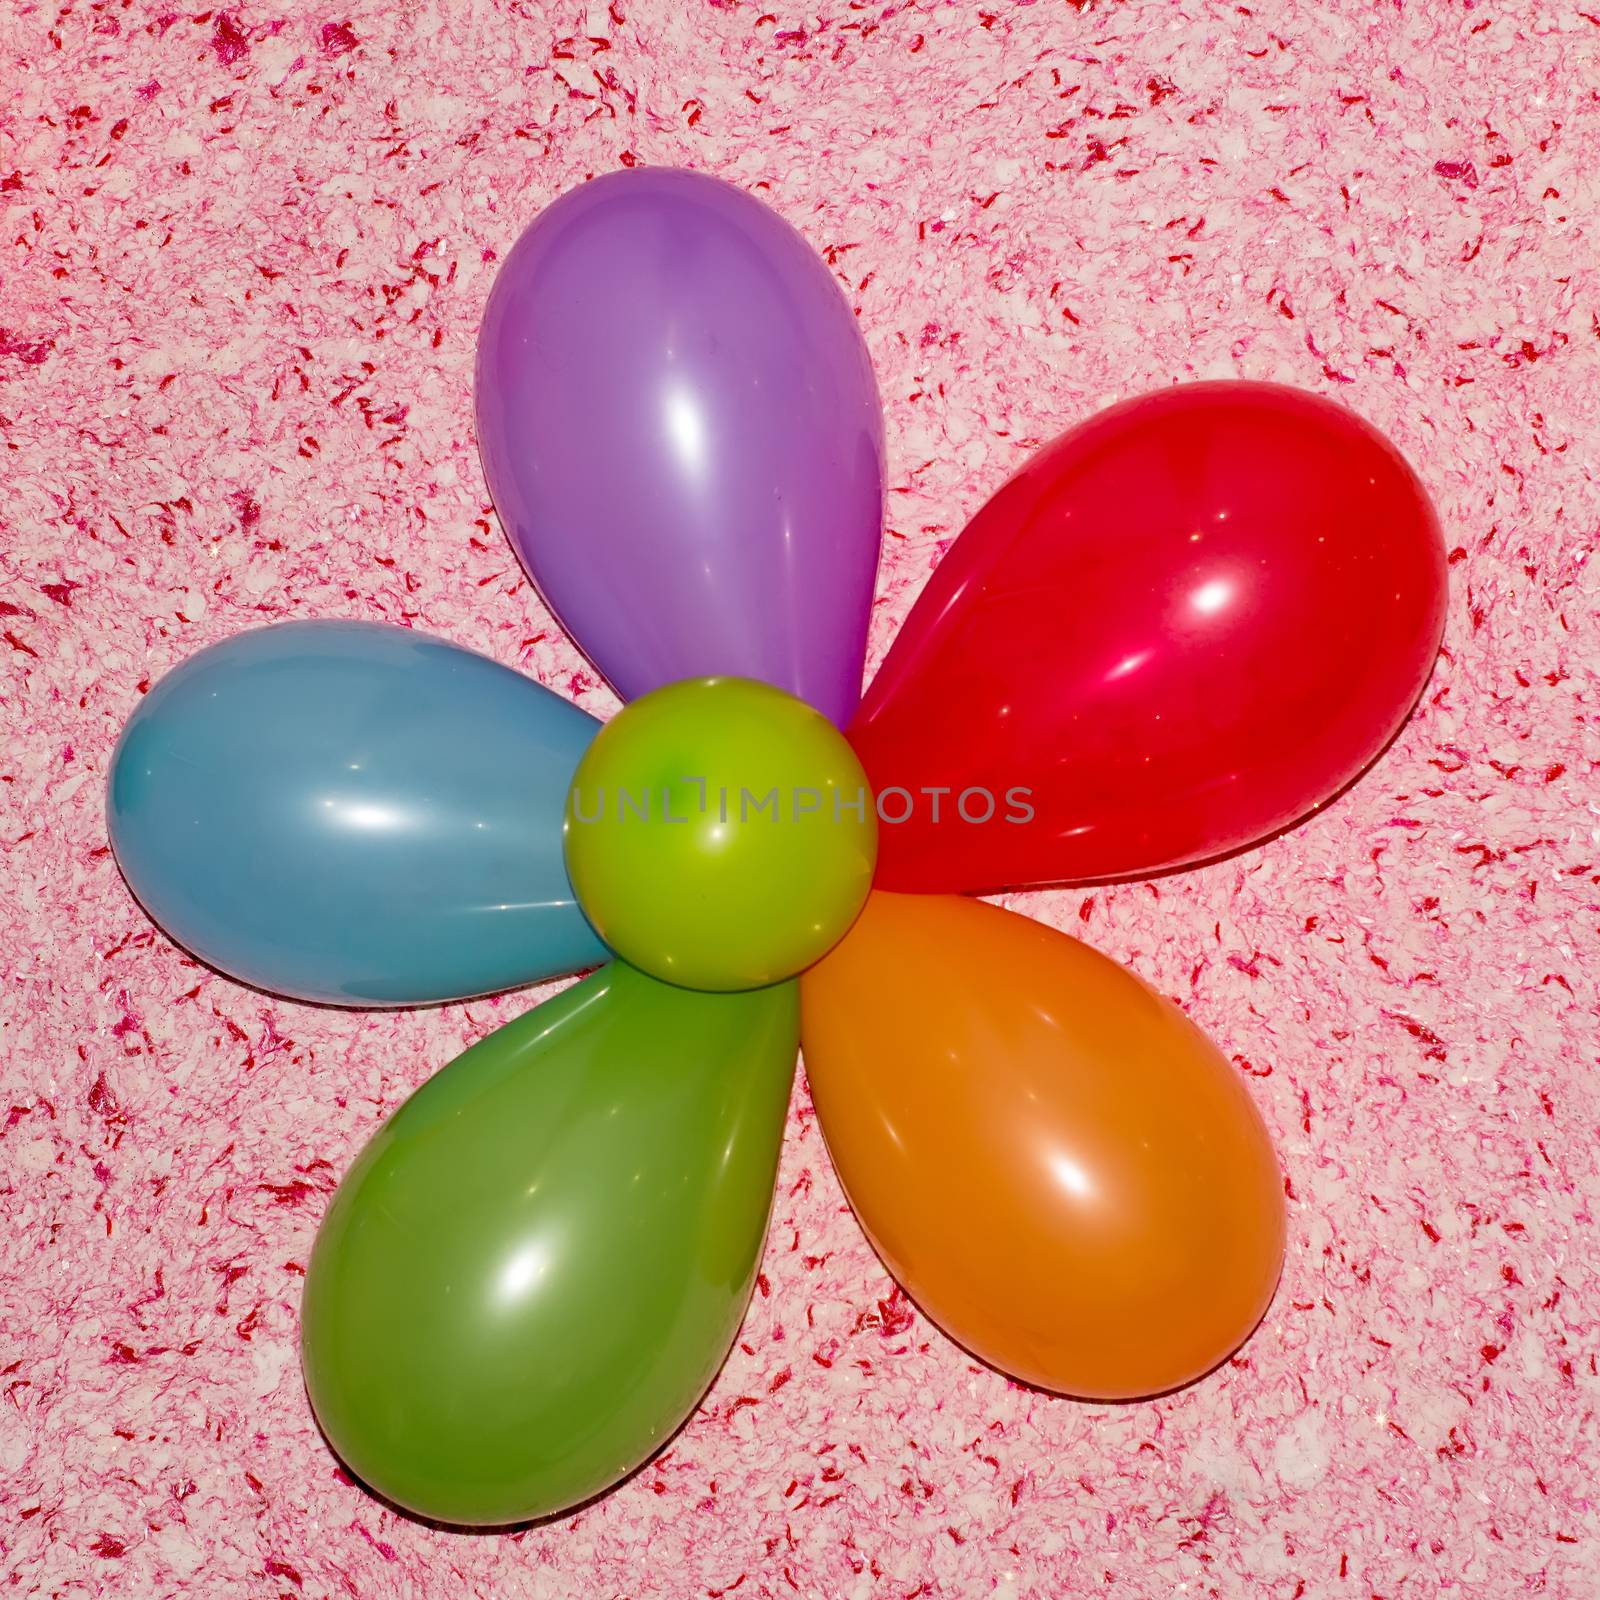 Merry colorful flower with balloons by Serhii_Voroshchuk